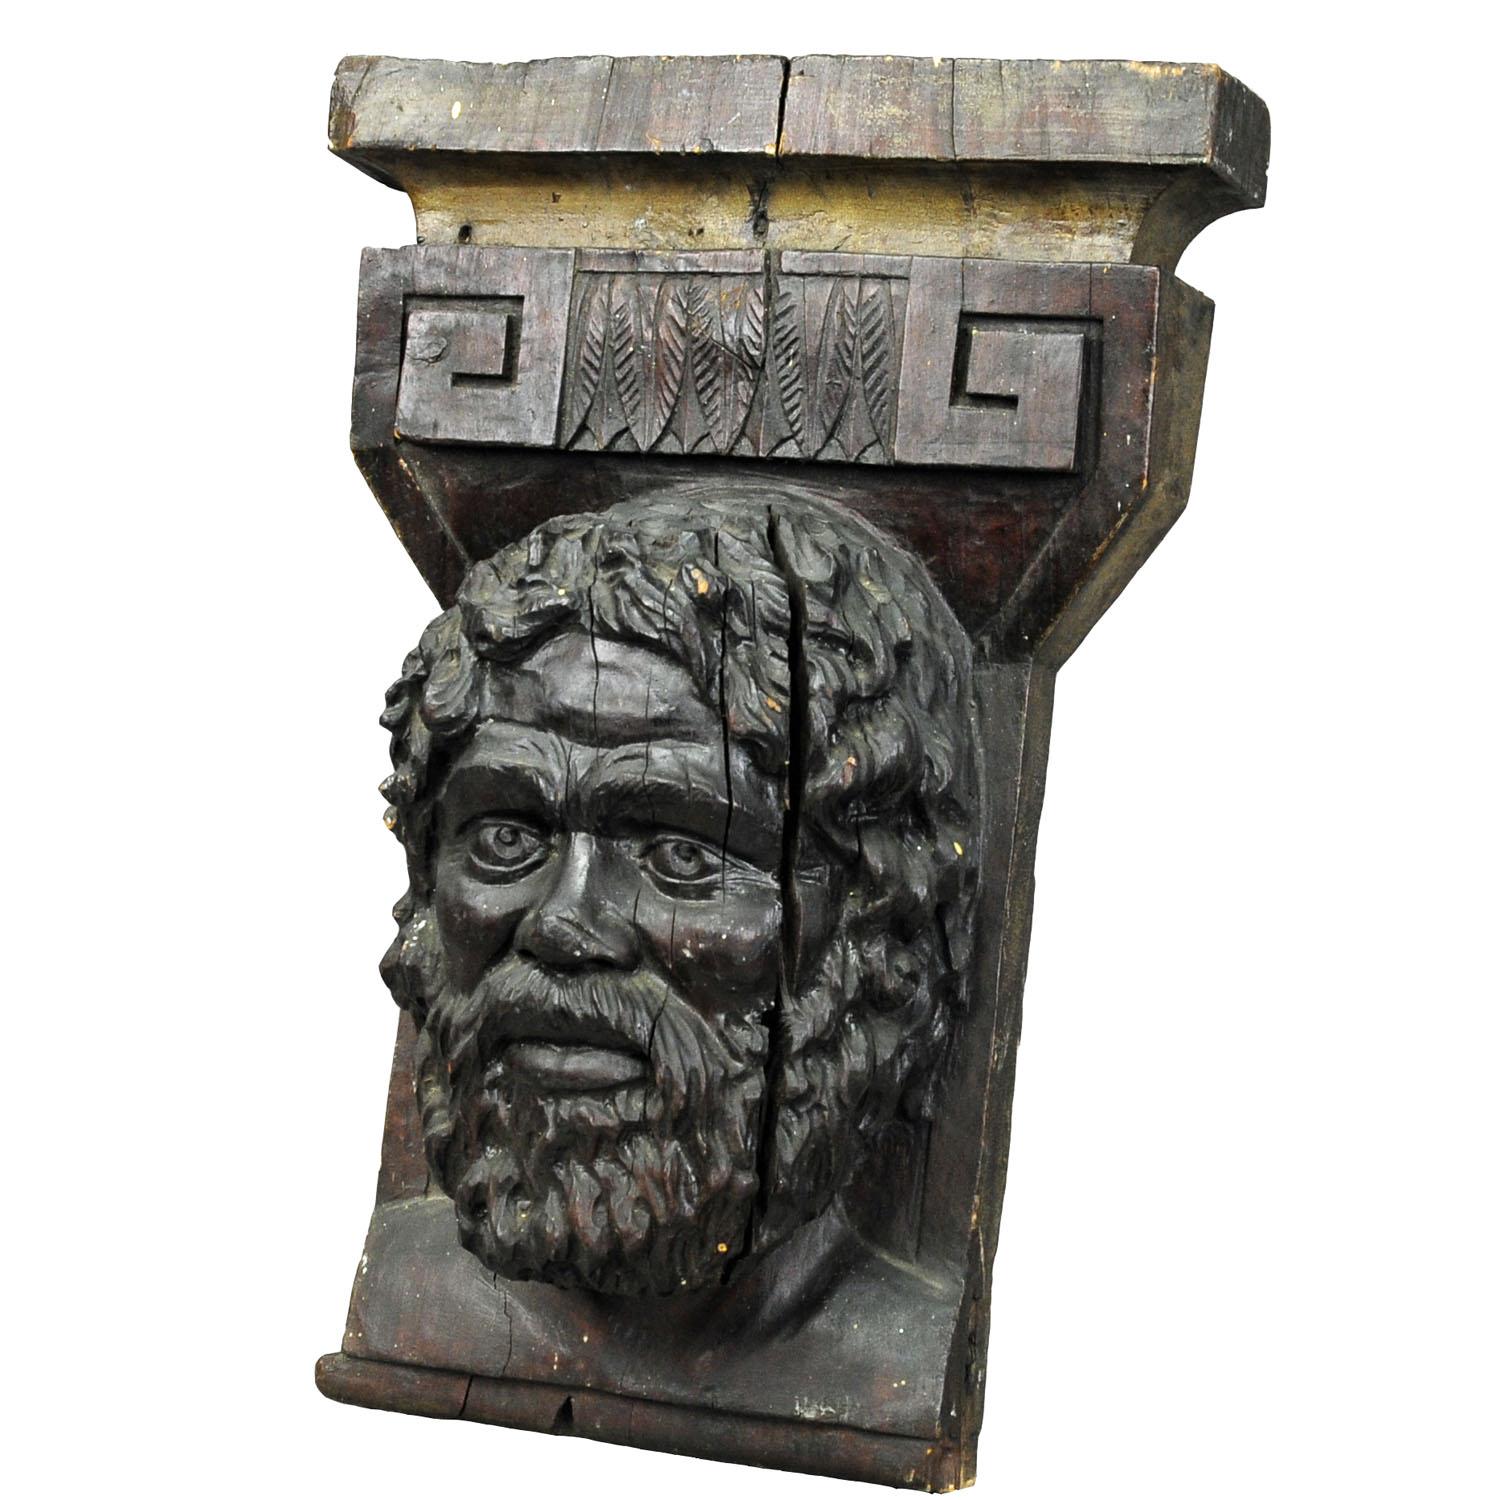 Wooden sculpture of a masculine face.

A highly detailed antique sculpture of a male face. It is an impressive wall decoration consisting of handcarved and stained wood.

Measures:
Width: 13.78